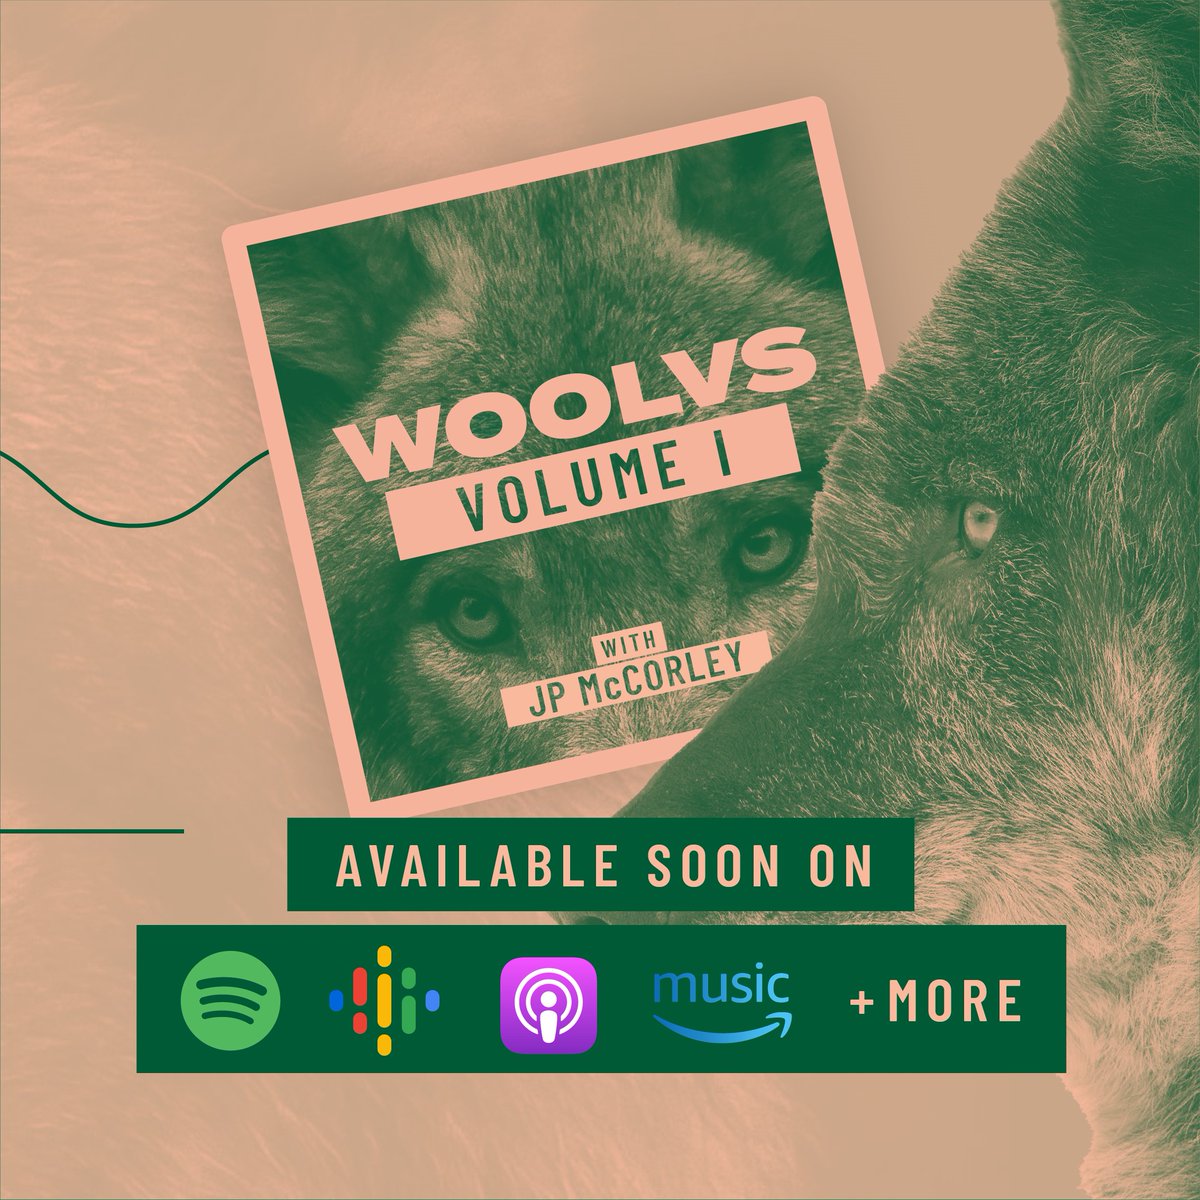 Exciting news! 🎉

🐺The Woolvs podcast🎙️ Volume One is here! 

Join @lesleydoestri, @MarkRowley90, @iainarcher, and host @jpmccorley for actionable insights on thriving in your passions. 

Subscribe at Woolvs.com to be the first to know! #Woolvspodcast